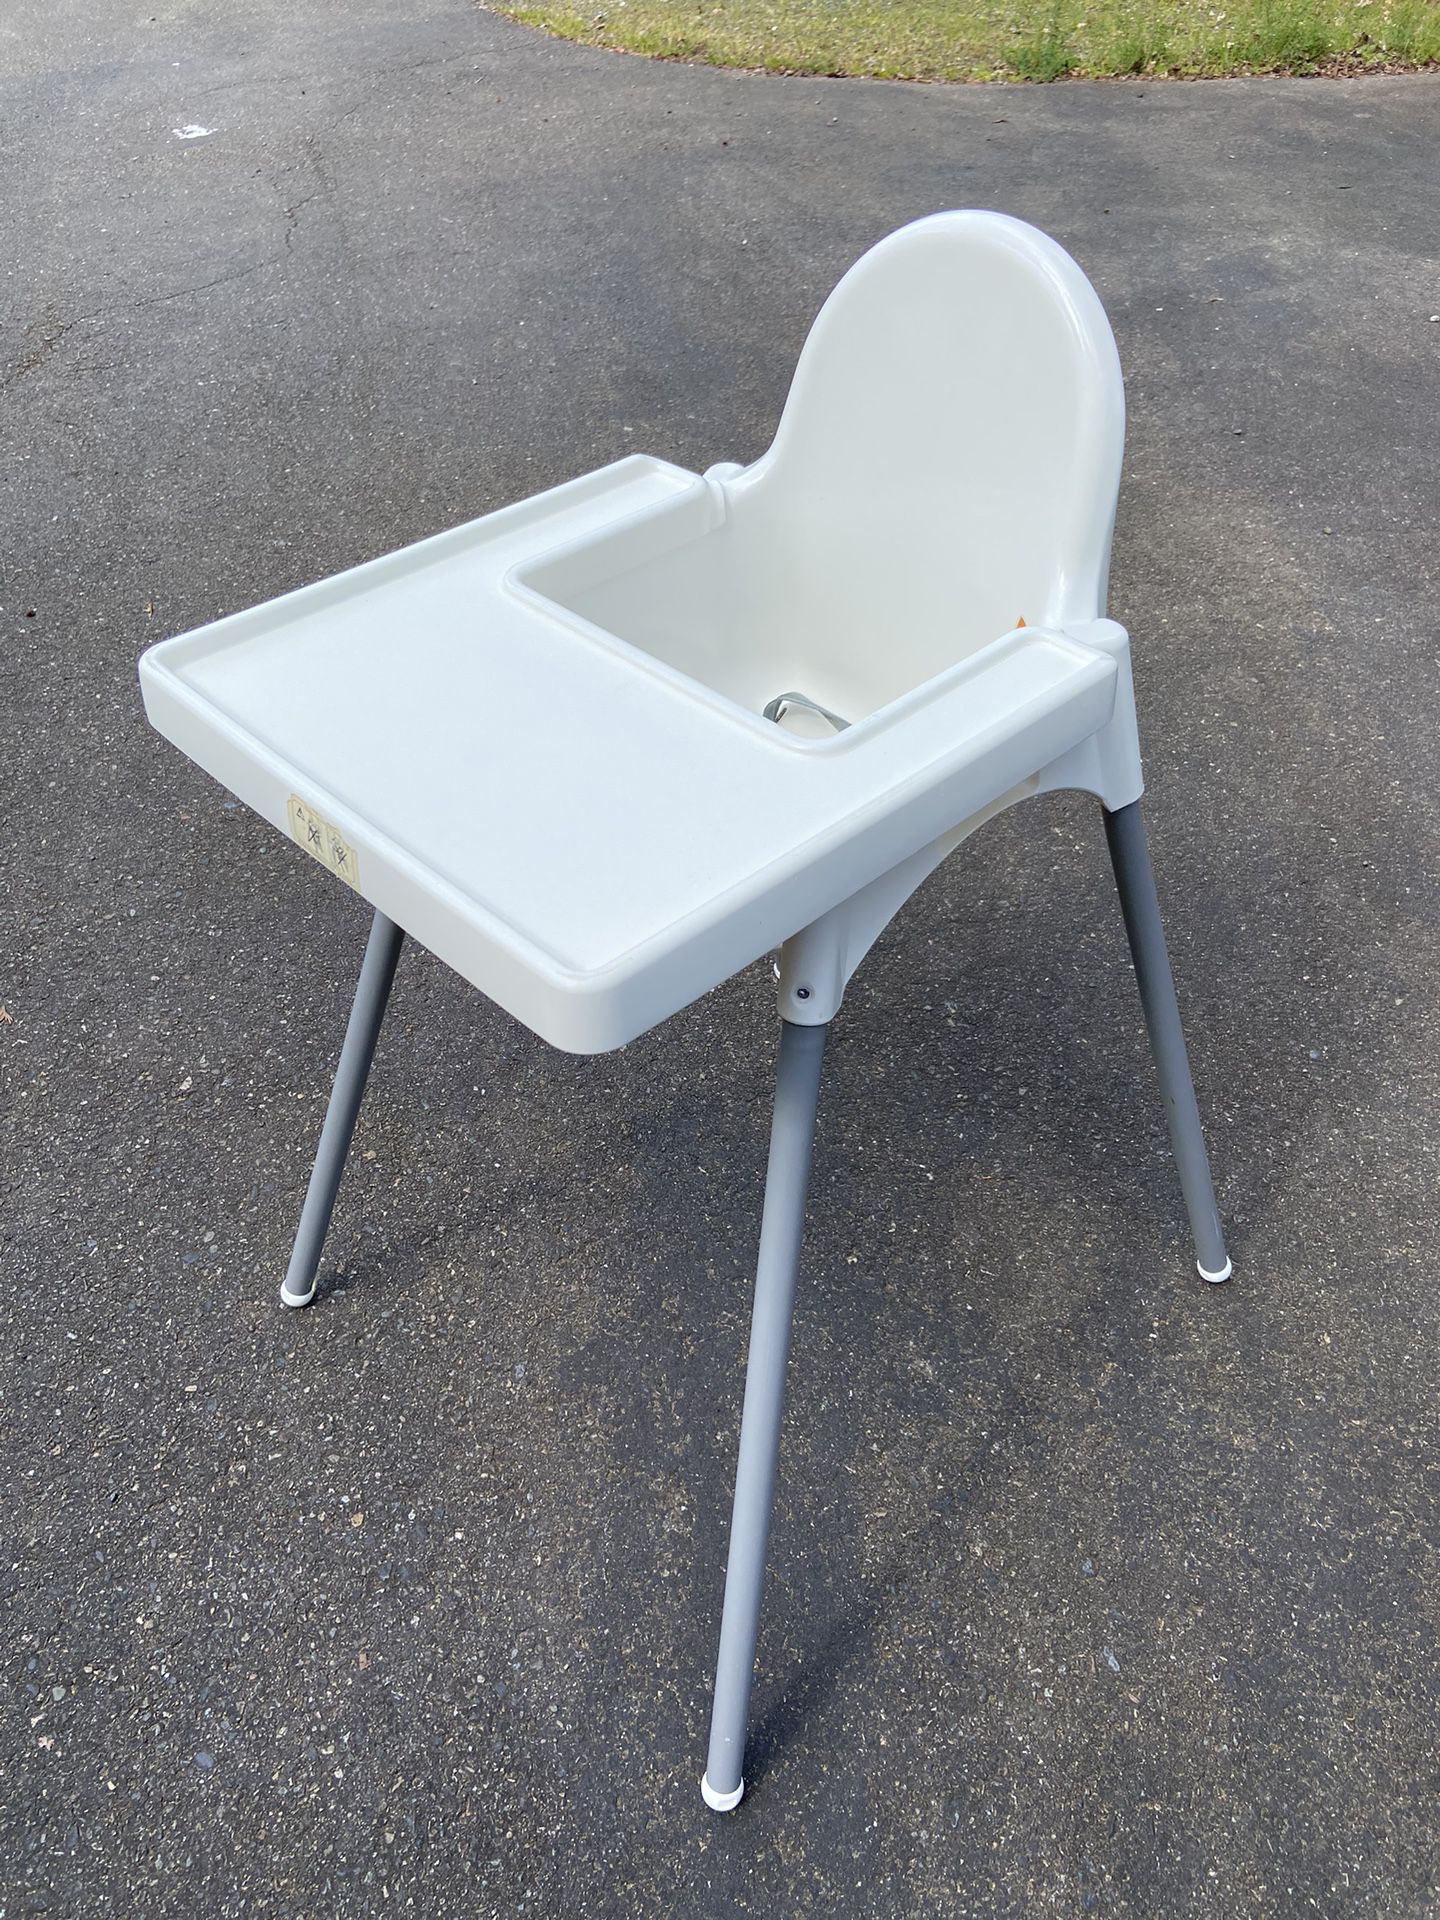 Gently Used IKEA  ANTILOP High Chair with Tray - $10